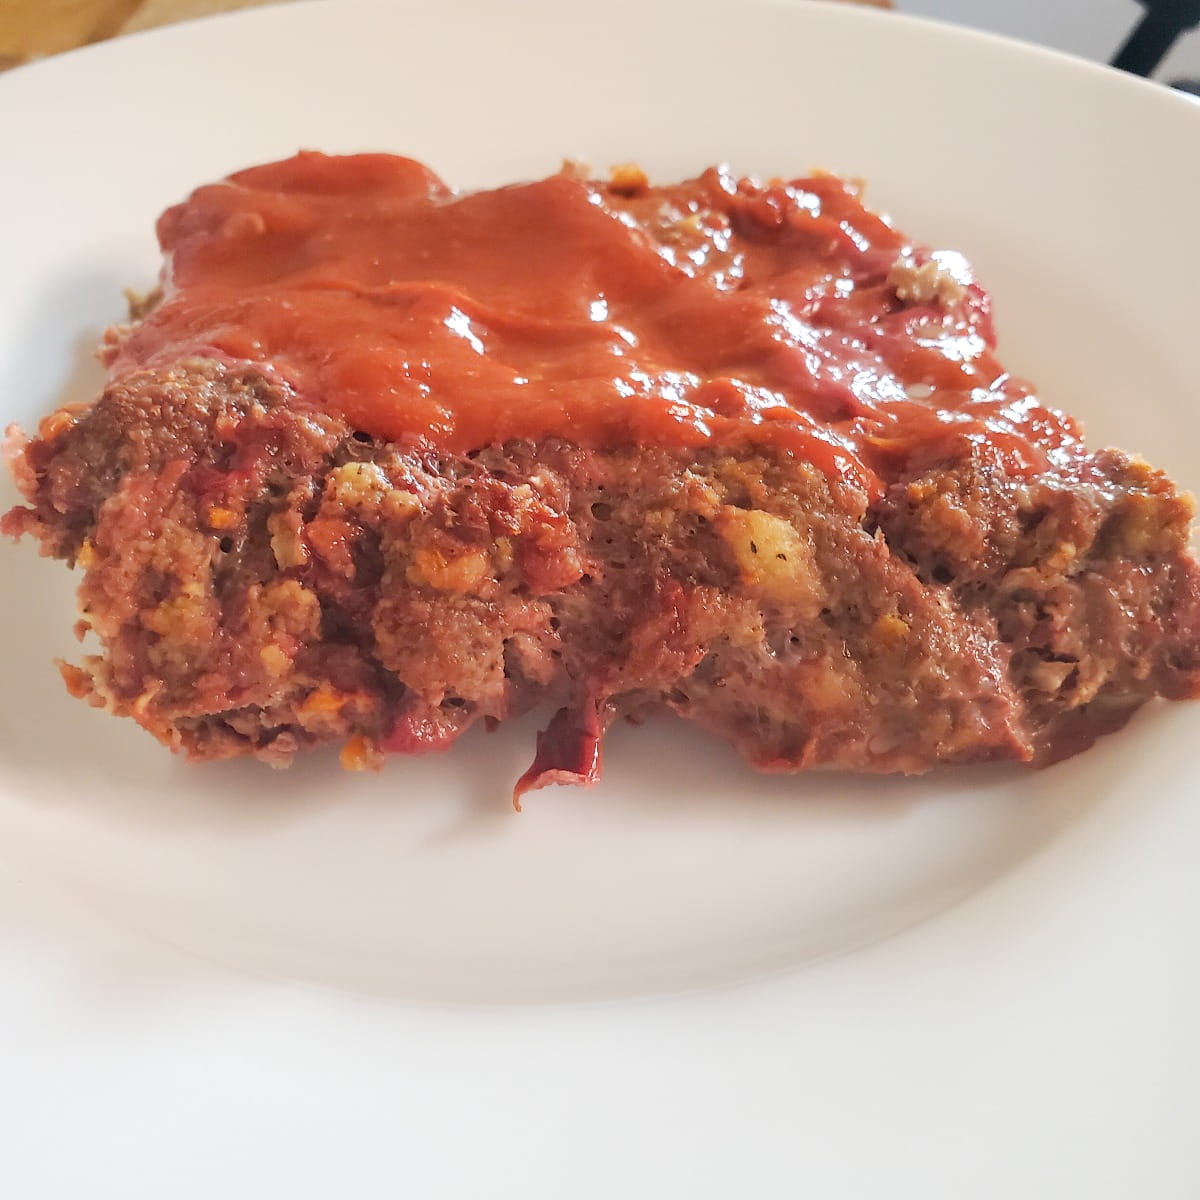 Our Favorite Meatloaf Recipe from Cleveland Cooking. Meatloaf with a sweet tomato sauce baked on top.